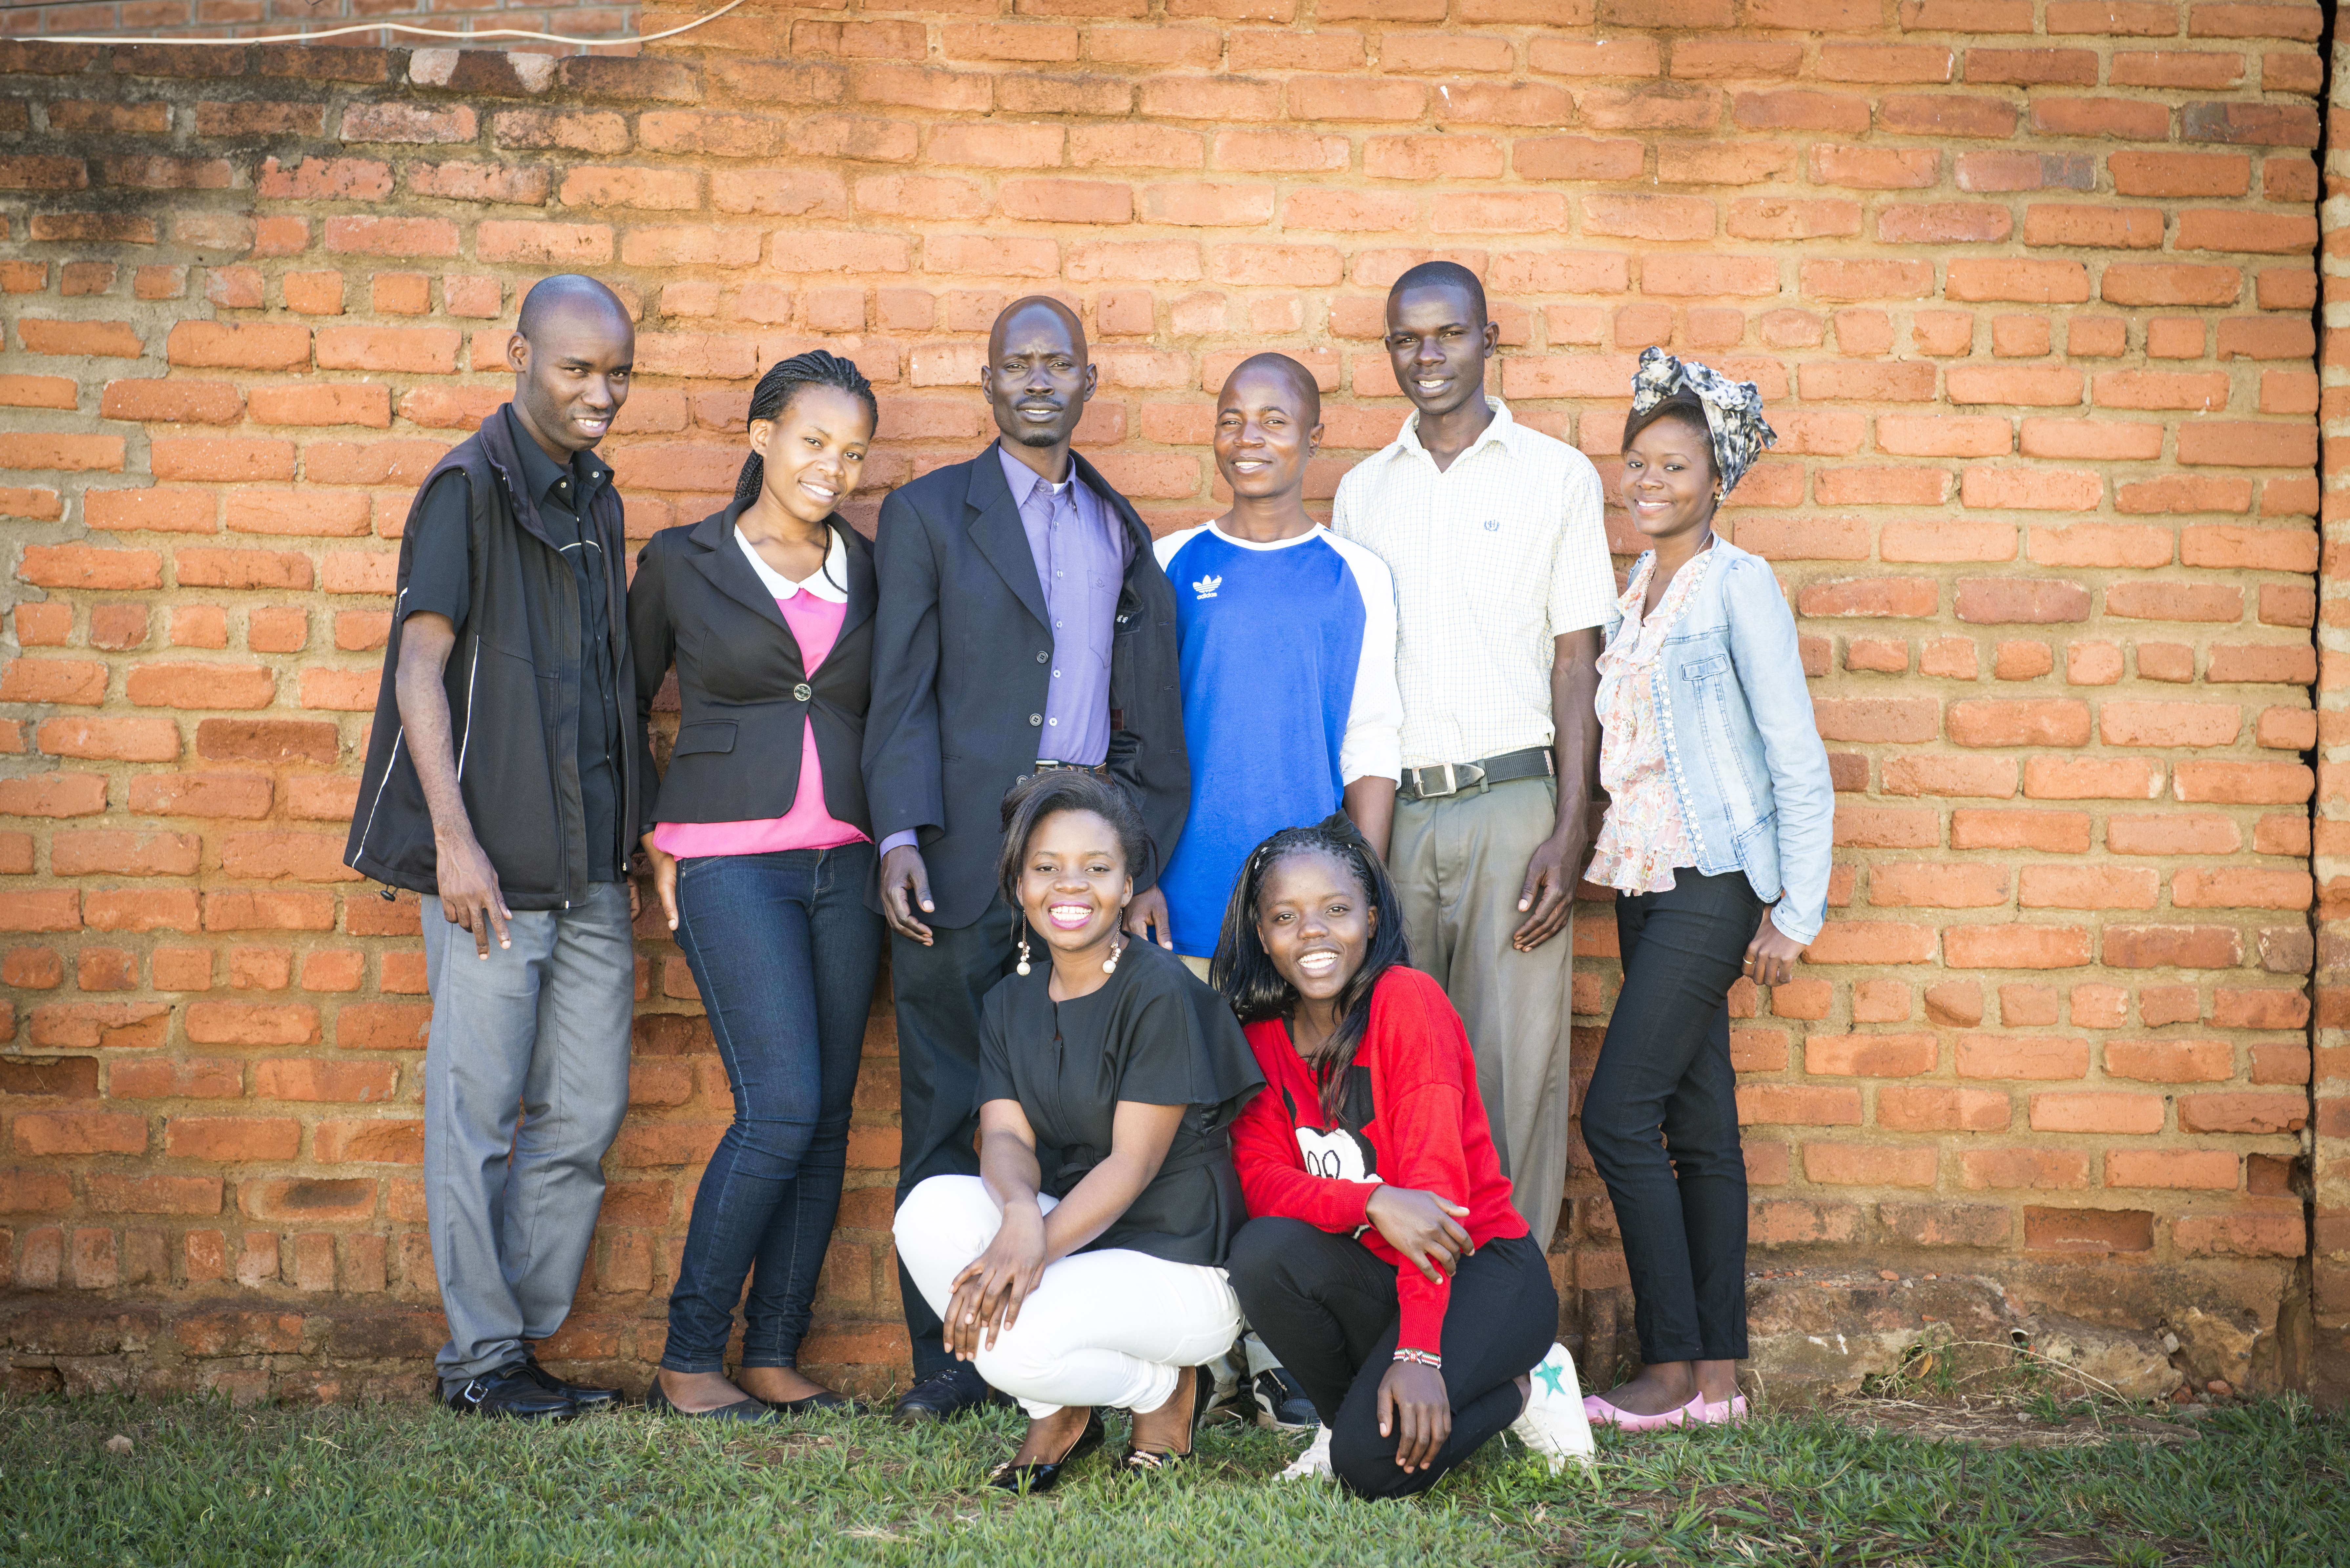 Youth campaigners ending child marriage in Malawi